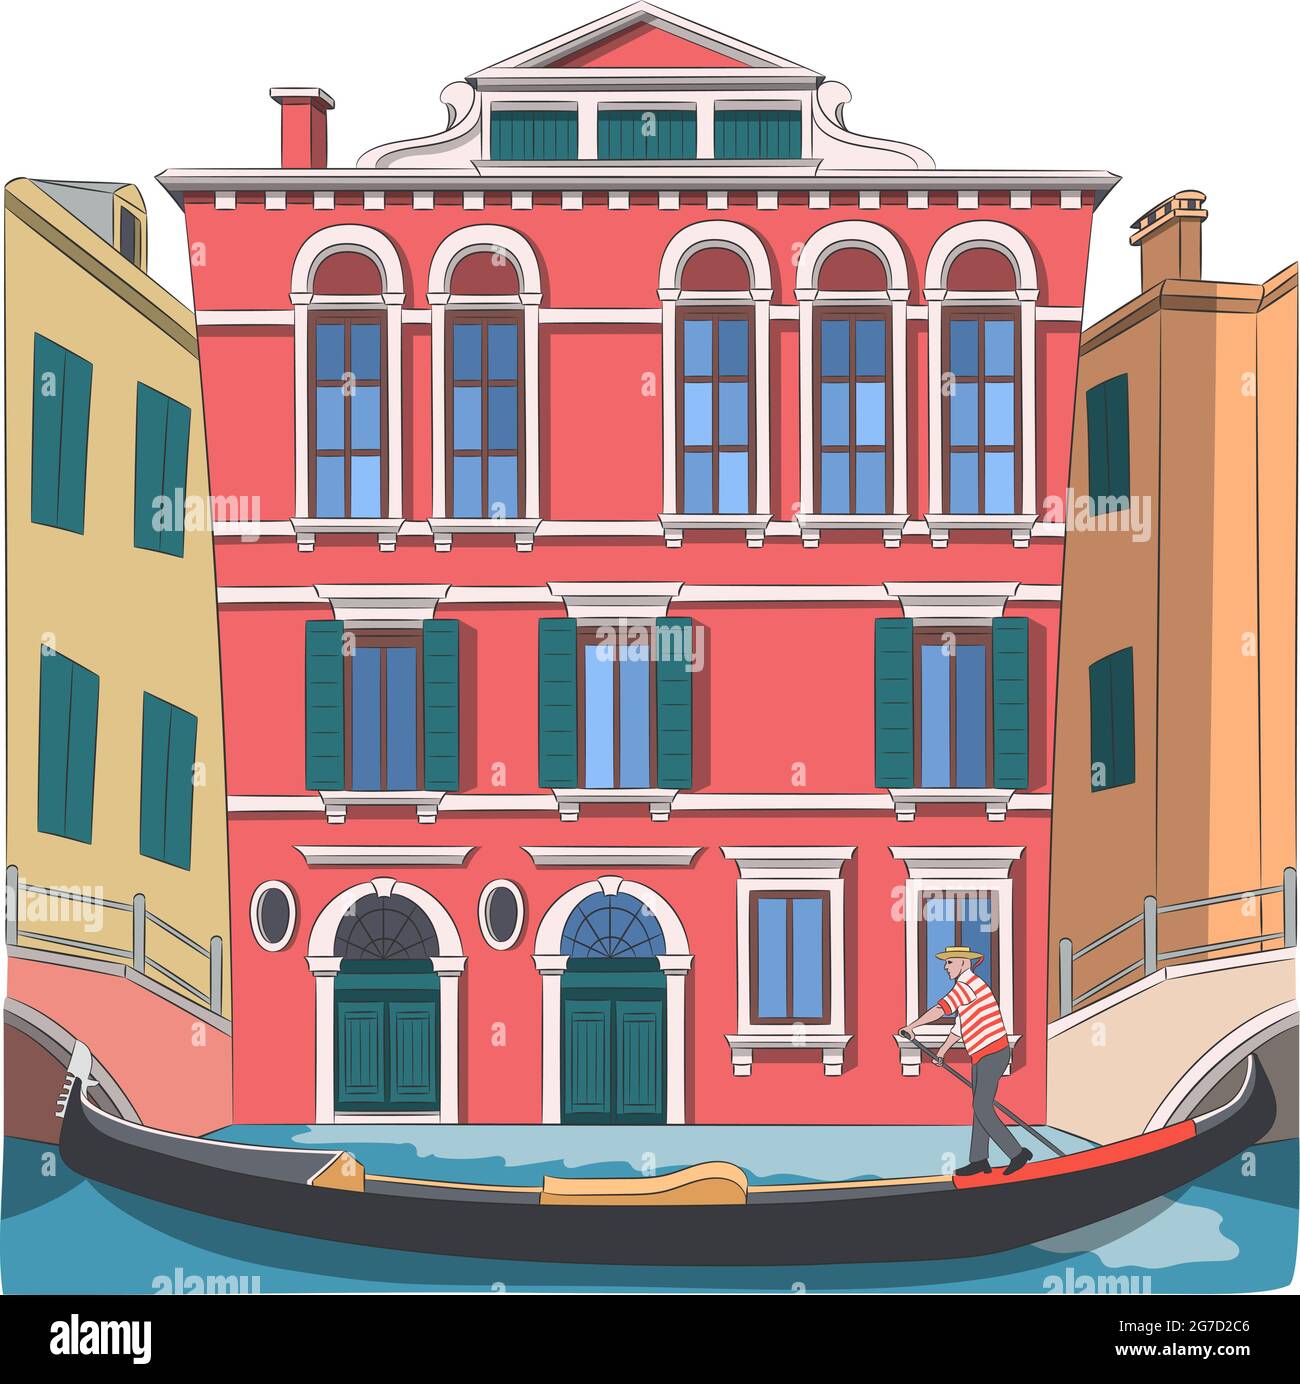 A gondolier in a gondola boat against the backdrop of traditional Venetian houses sails along the canal of Venice. Stock Vector